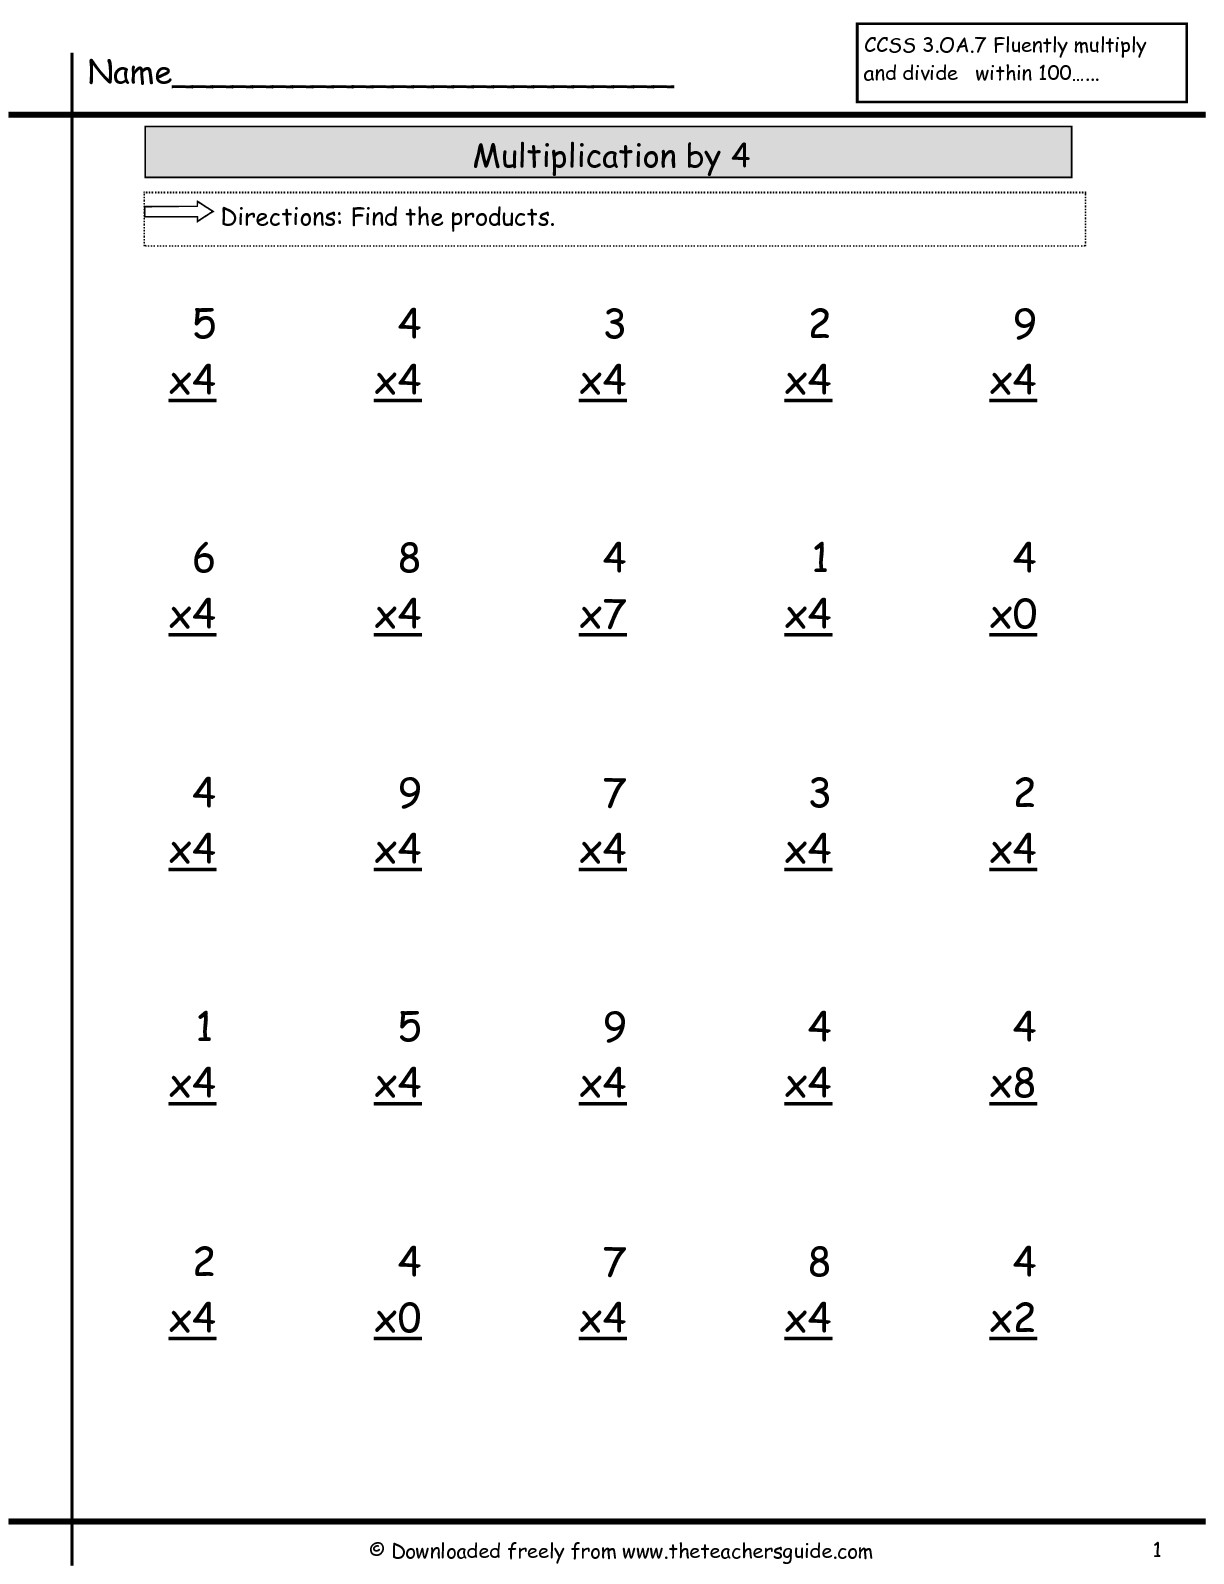 Multiplication Facts Worksheets From The Teacher&amp;#039;s Guide inside Multiplication 4 Printable